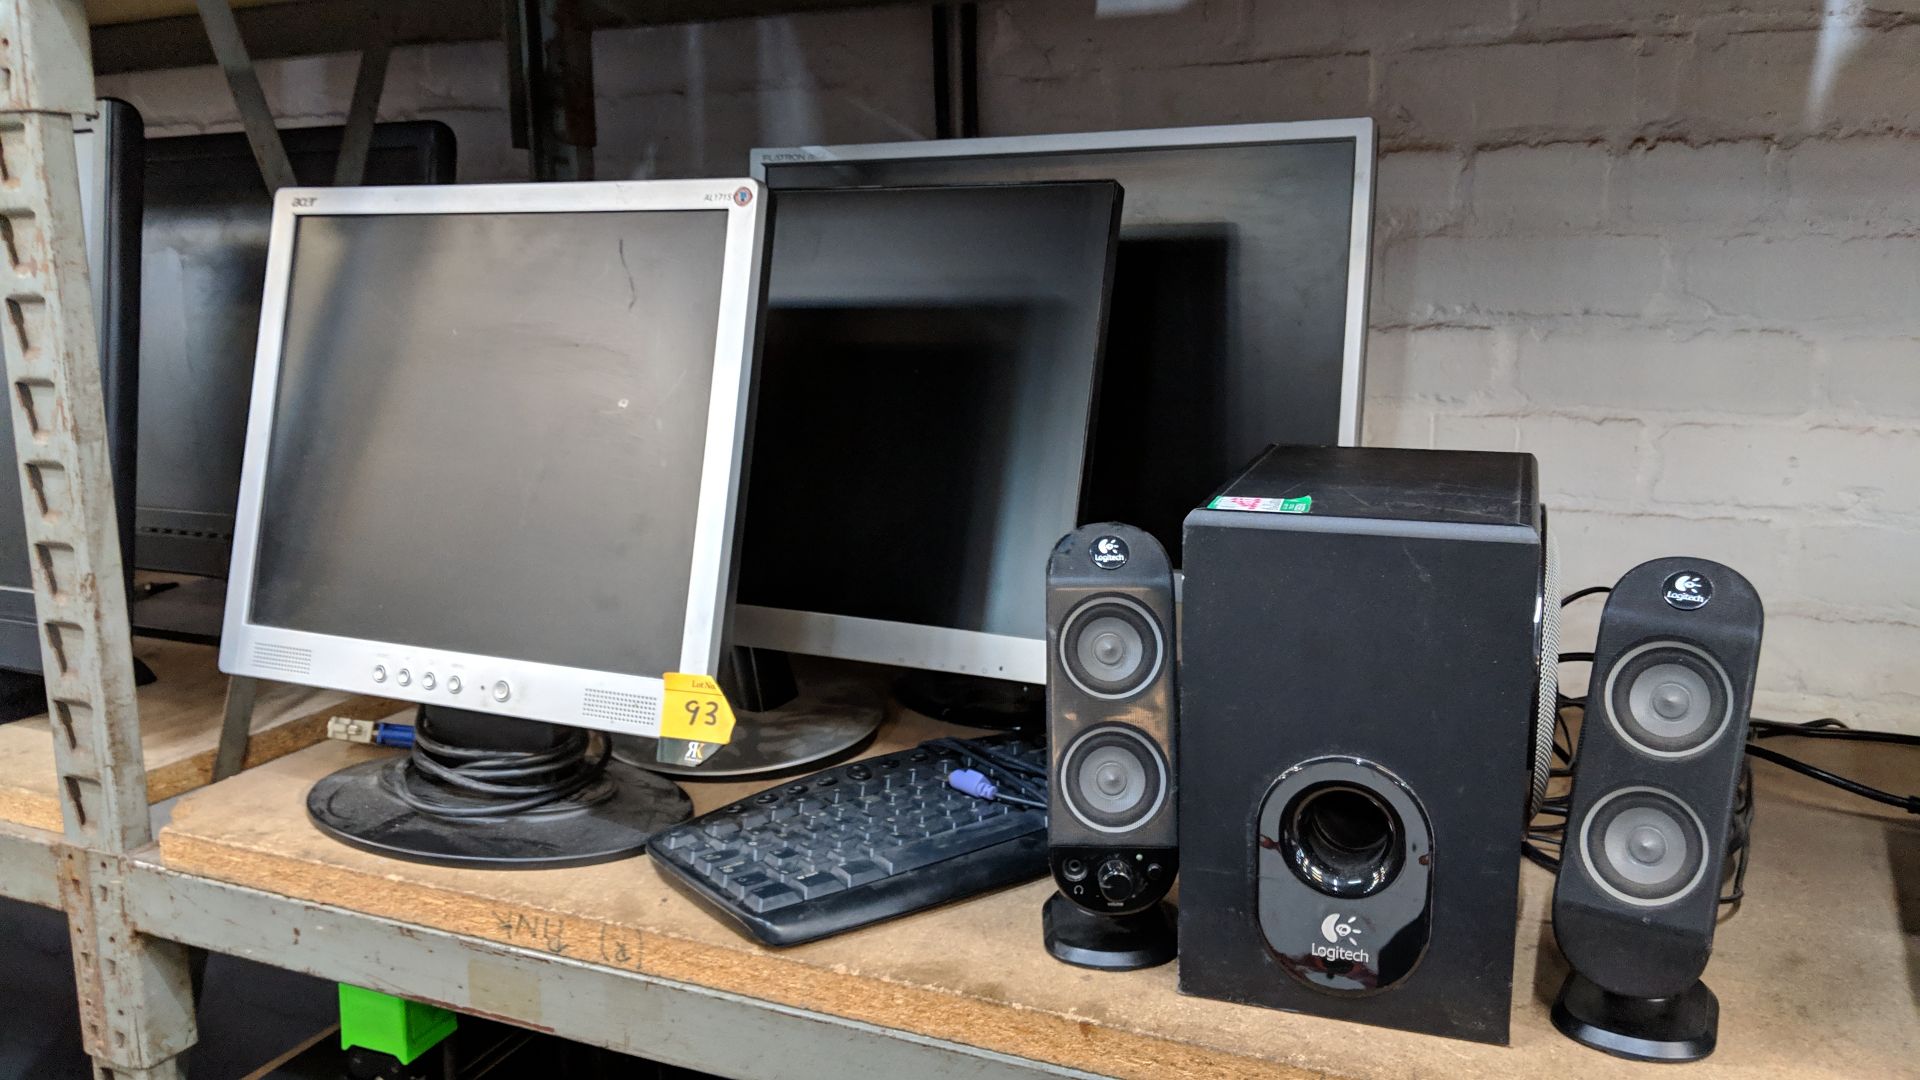 Computer/IT equipment comprising 3 assorted monitors, 1 keyboard & 1 Logitech 2.1 speaker system - Image 2 of 6